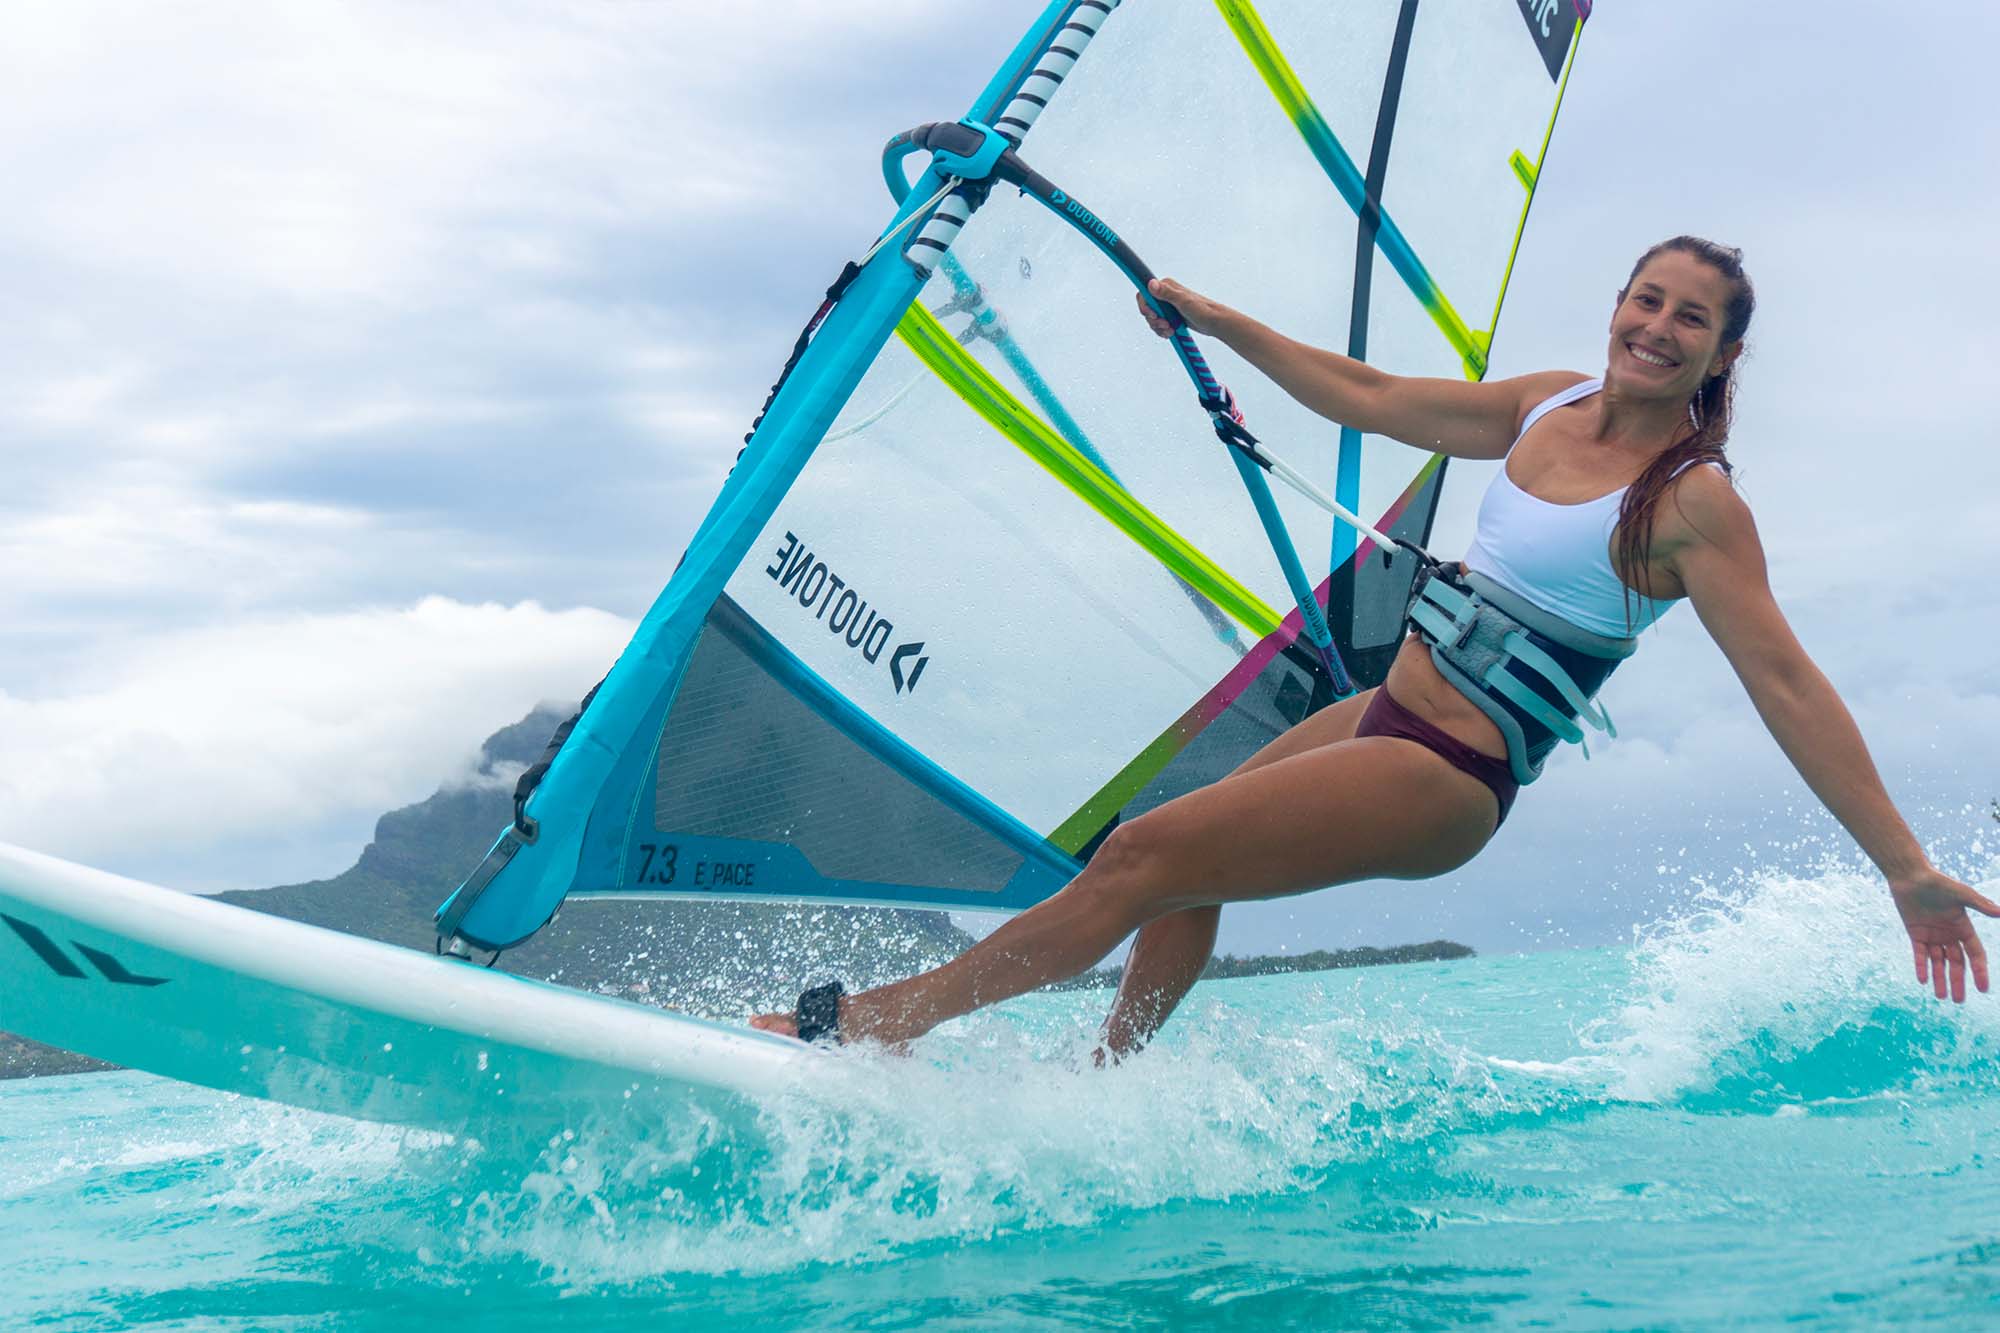 A WINDSURFER ON THE WATER IN MAURITIUS